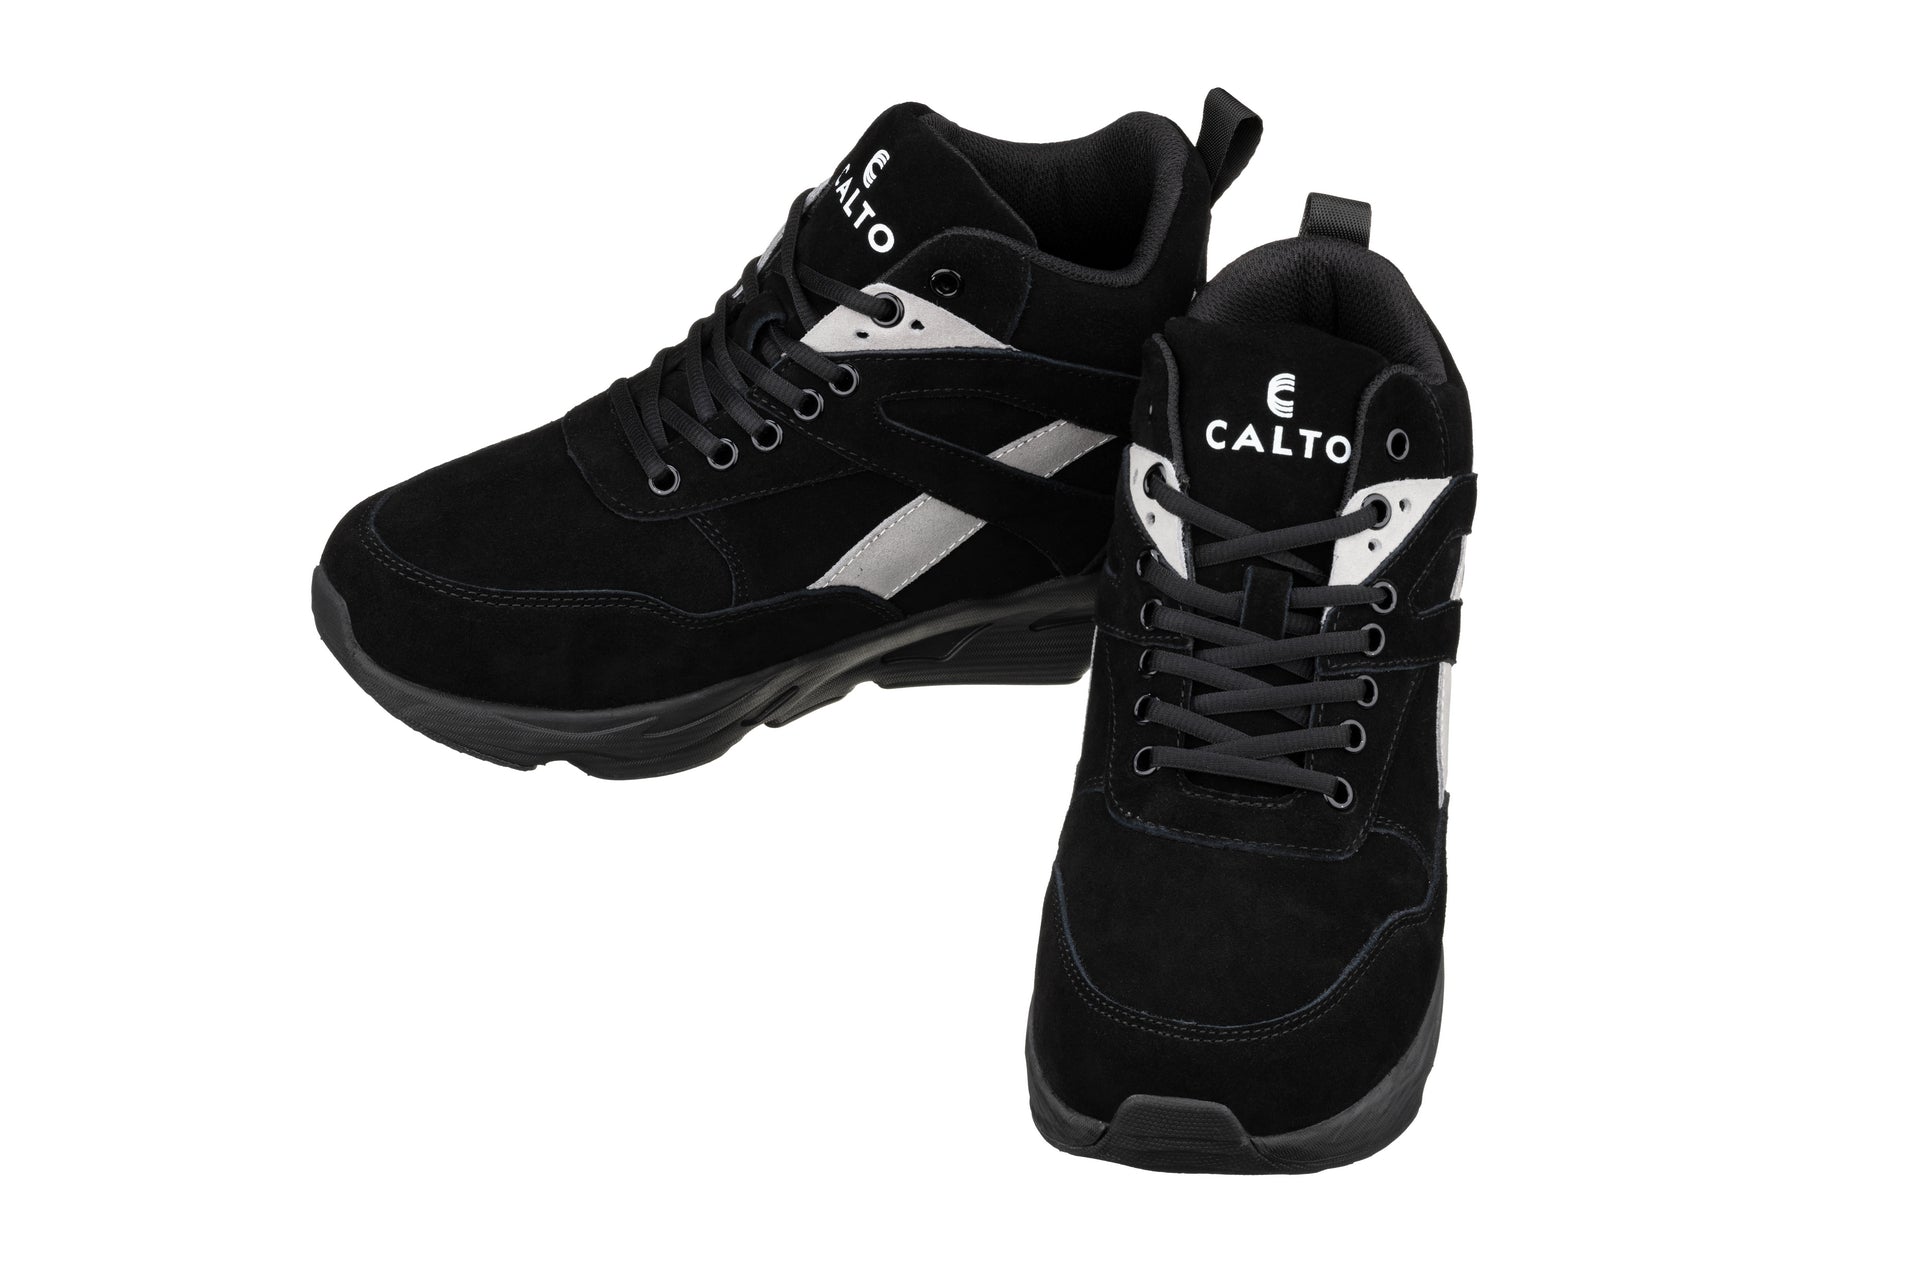 Elevator shoes height increase CALTO - S33594 - 4.0 Inches Taller (Black/Grey) - Sneakers